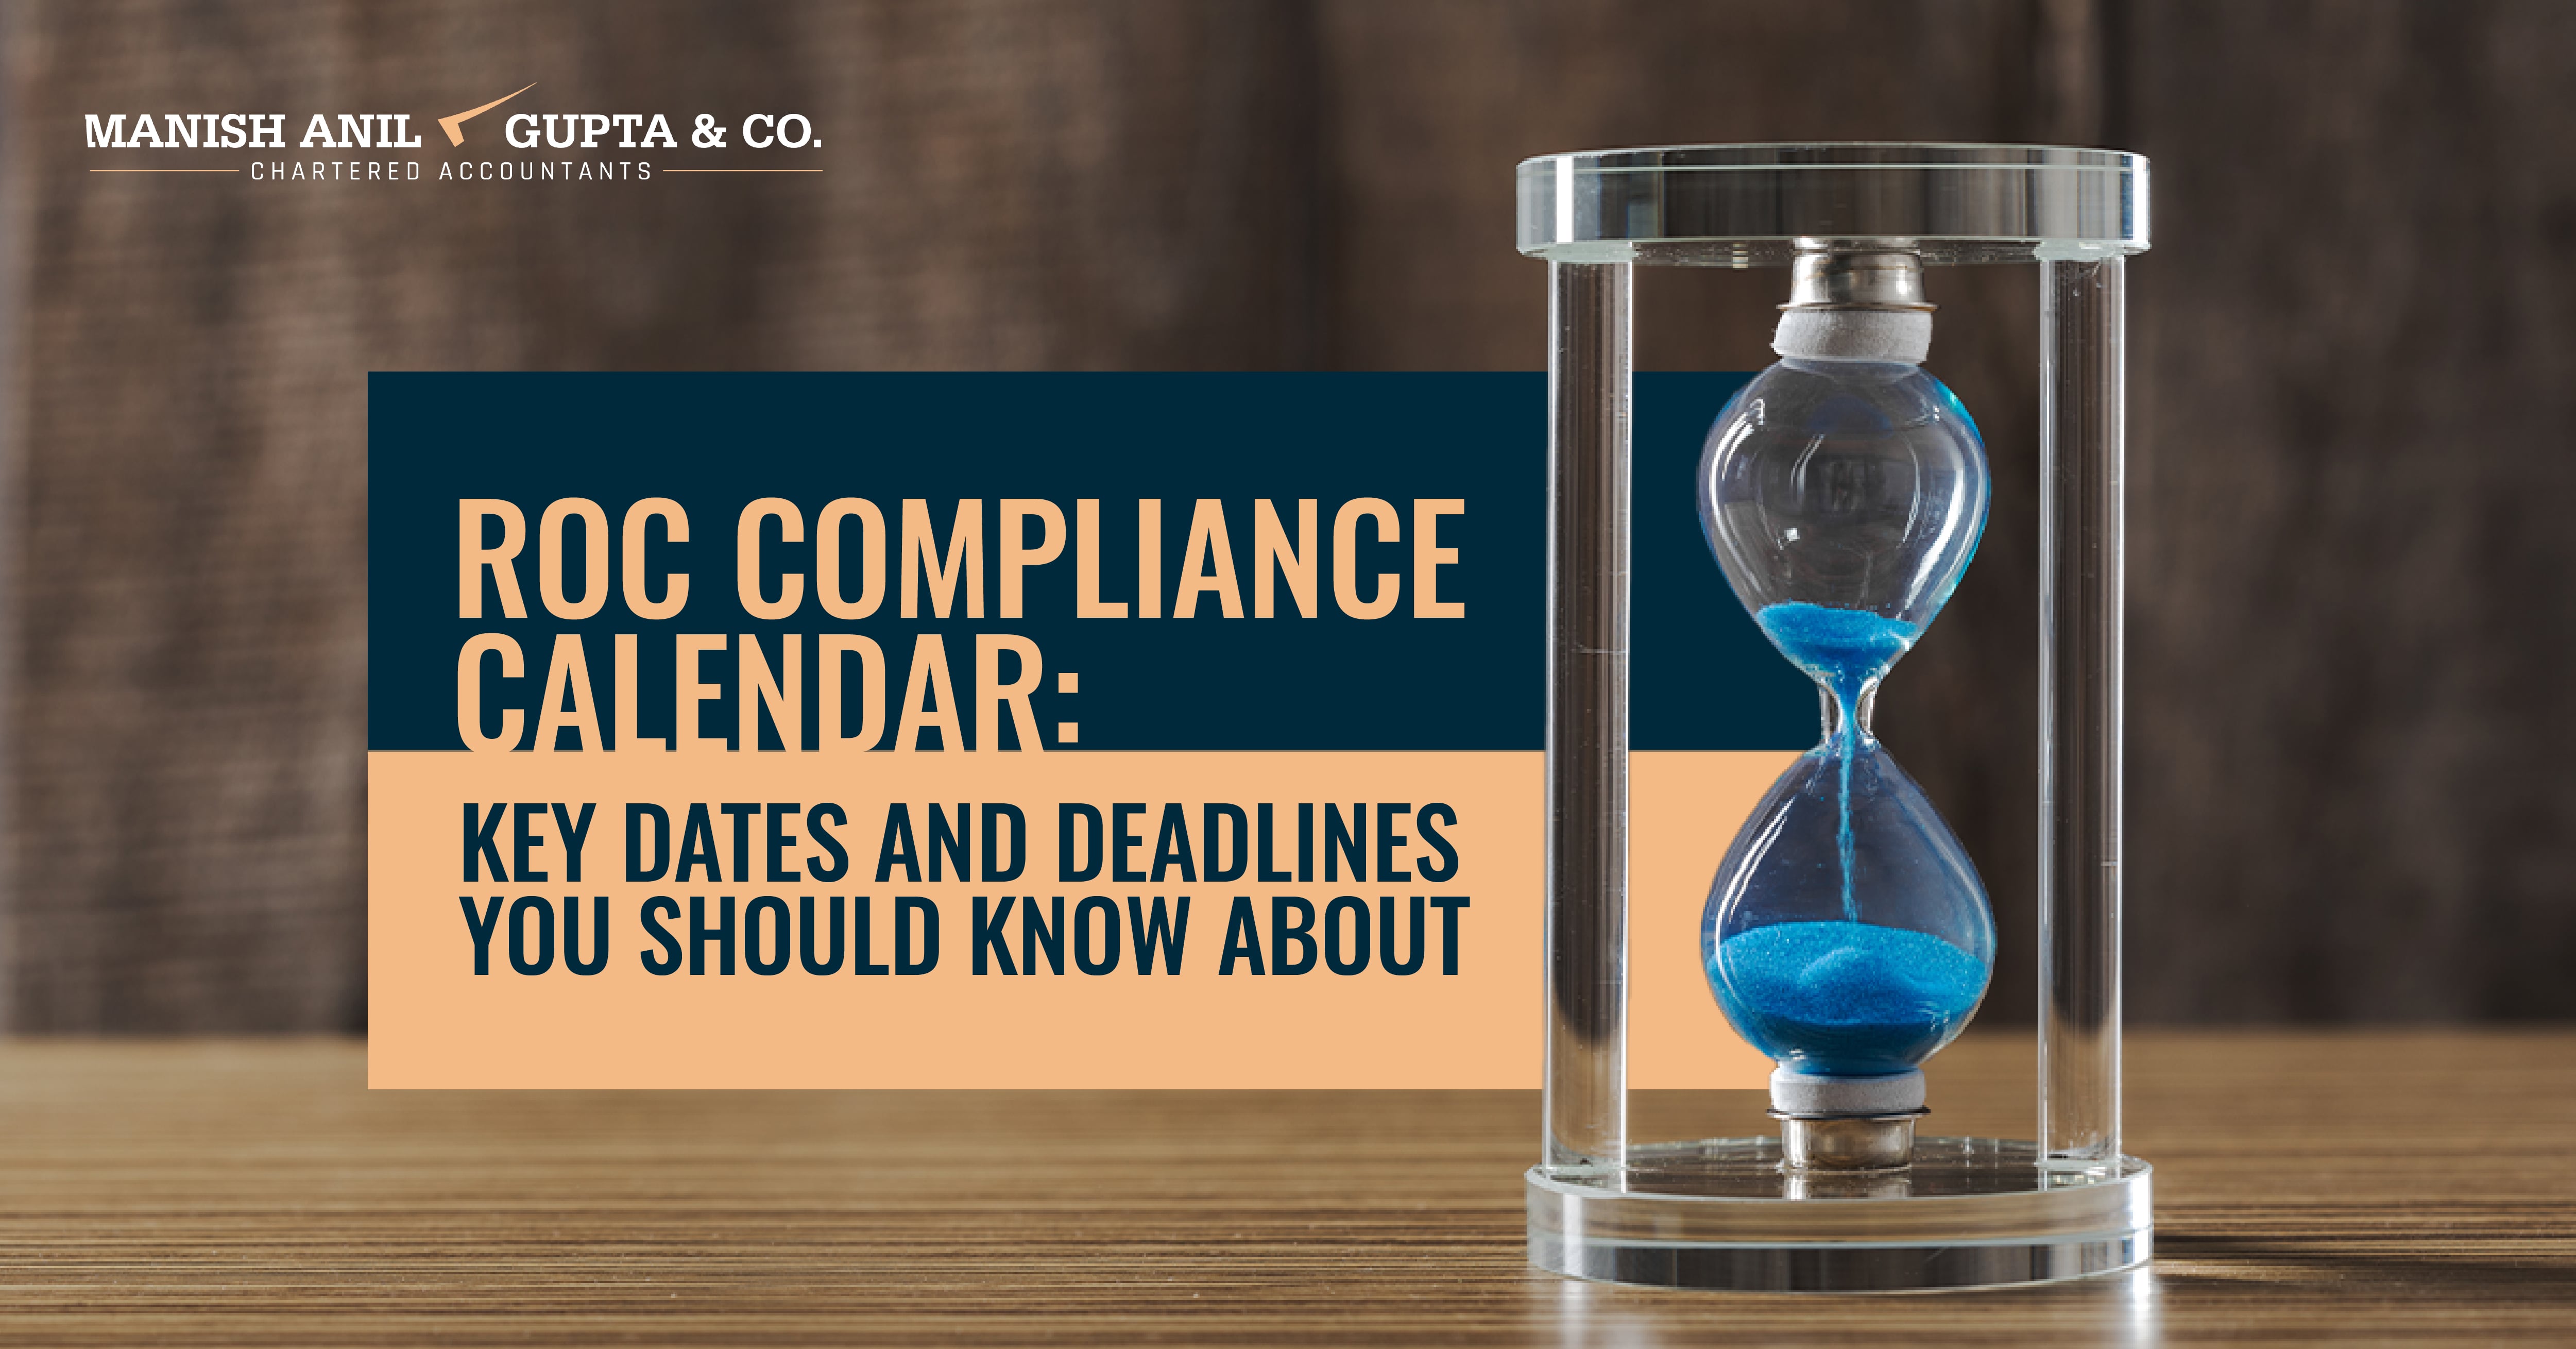 <ROC Compliance Calendar: Key Dates and Deadlines  You Should Know About